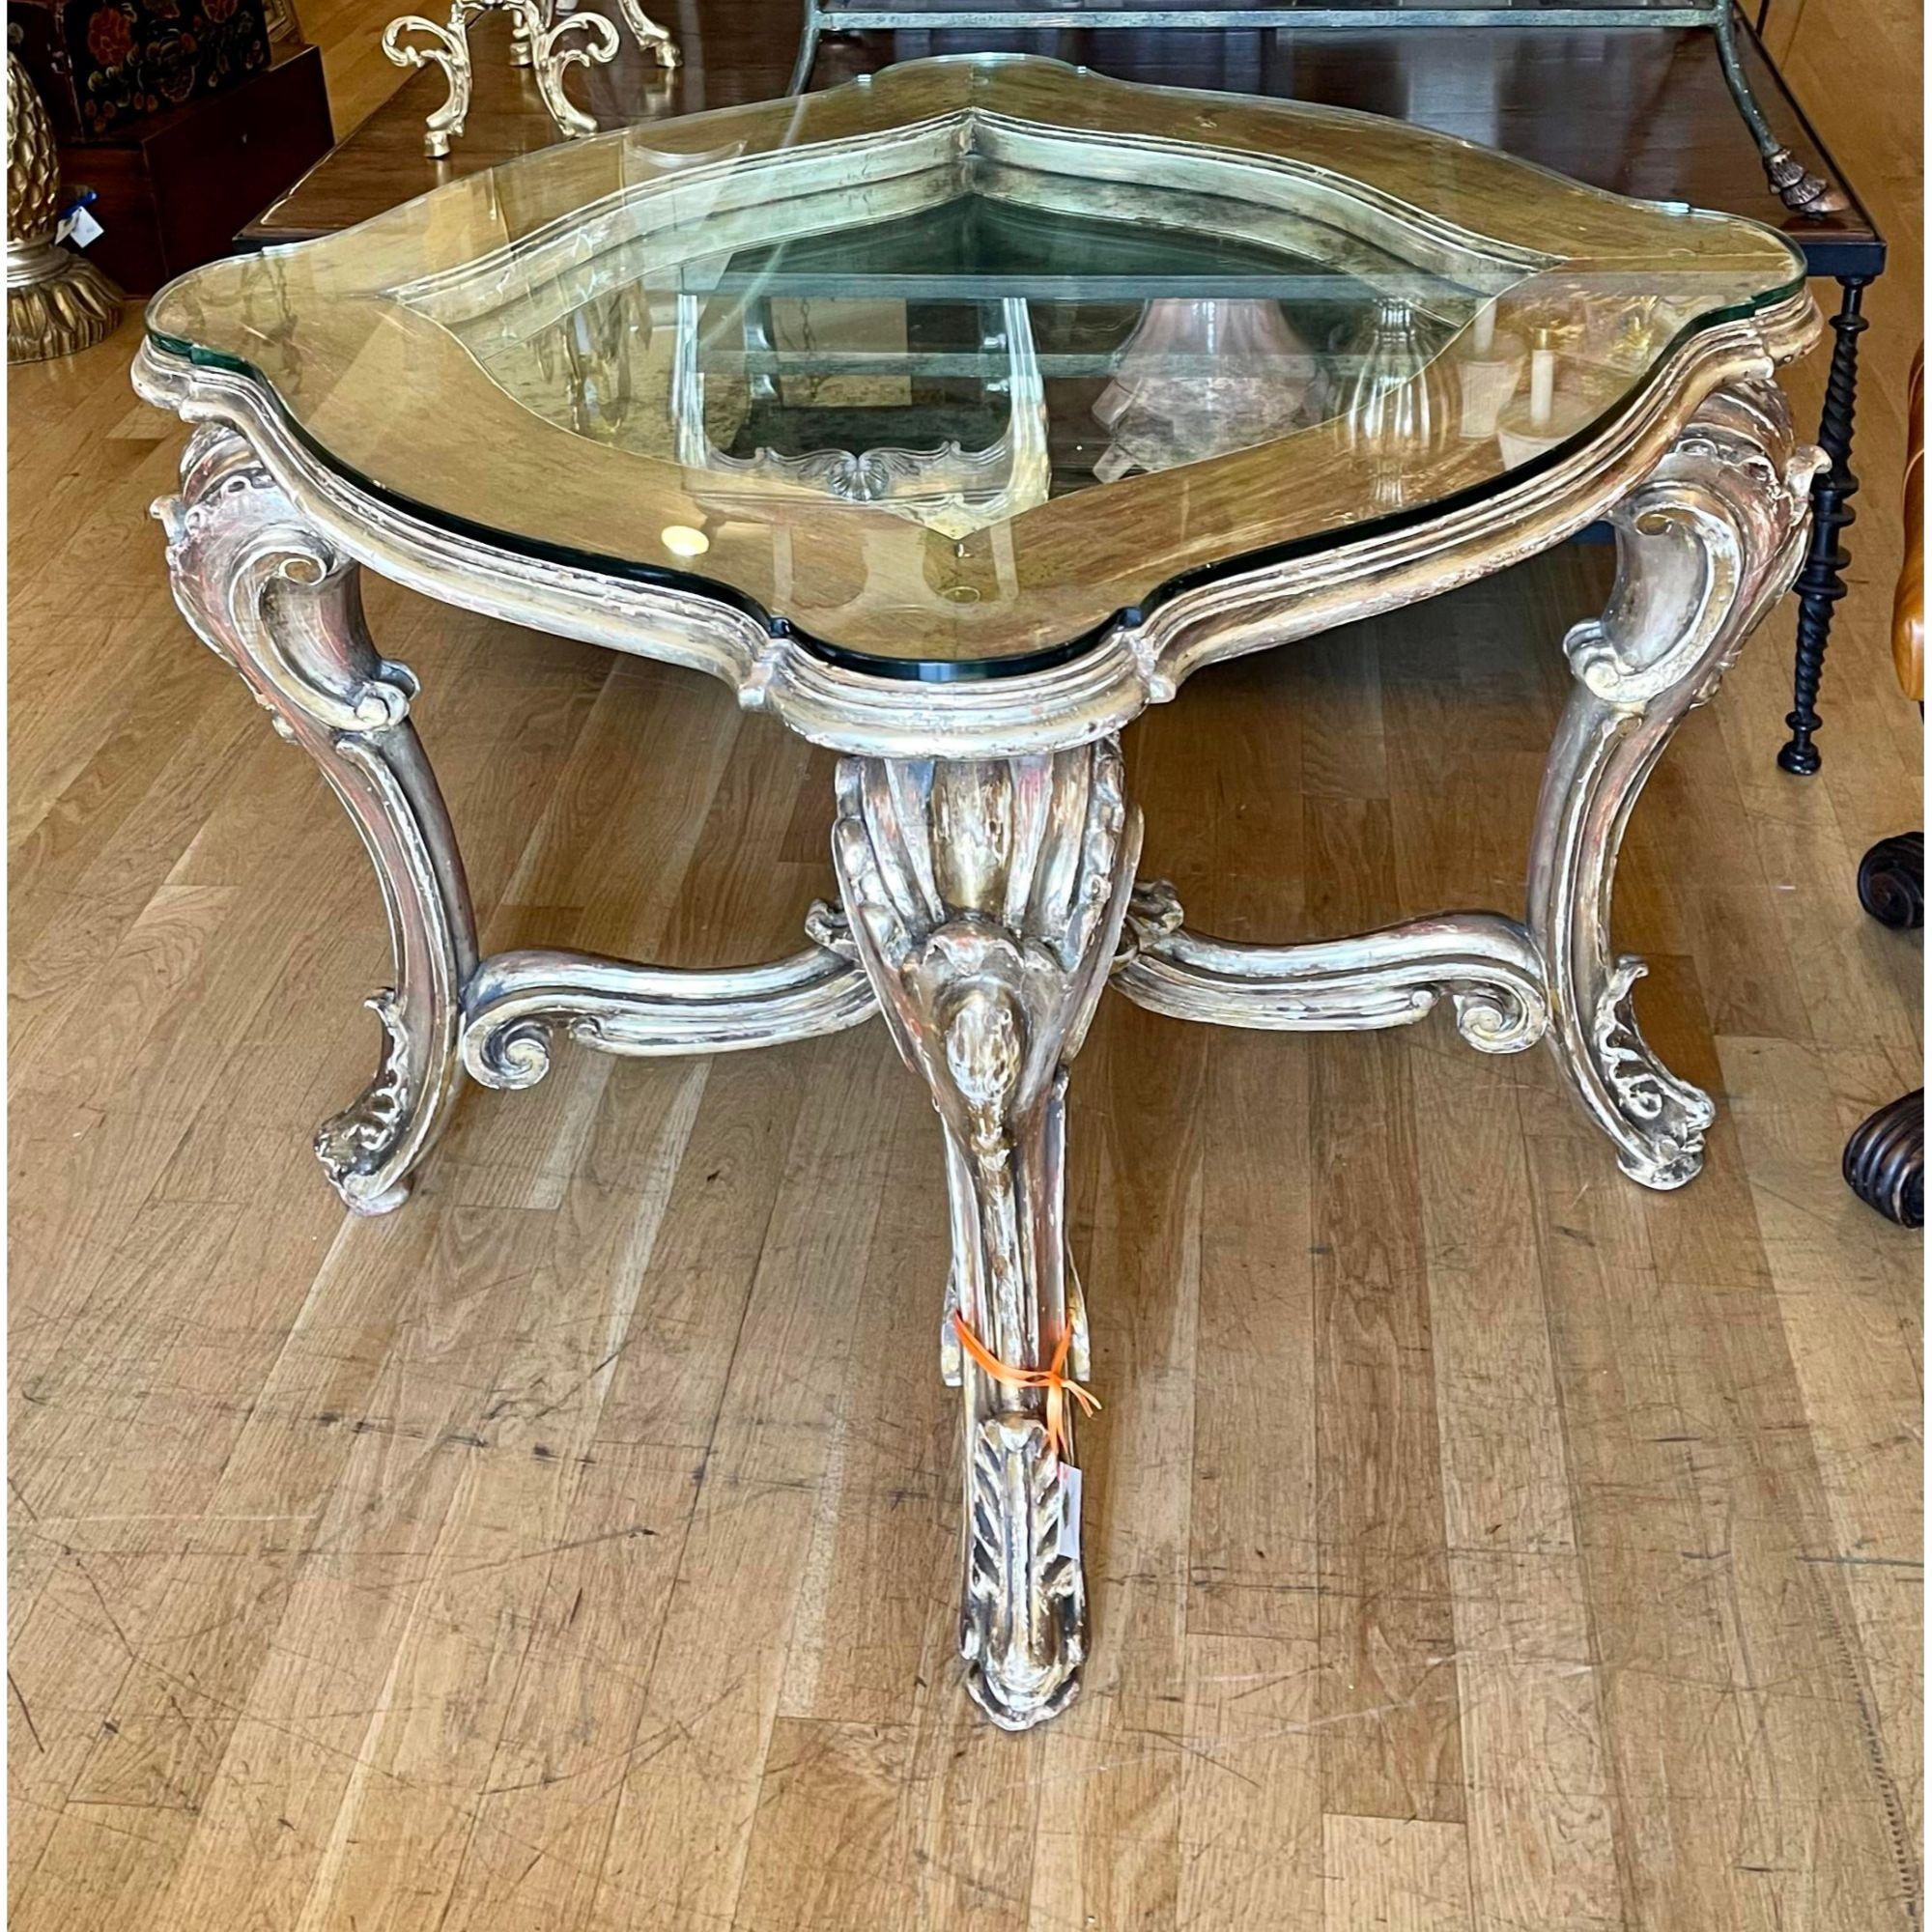 Antique 18th Century Style Rococo Venetian Giltwood Table by W Antiqued Mirror In Excellent Condition For Sale In LOS ANGELES, CA